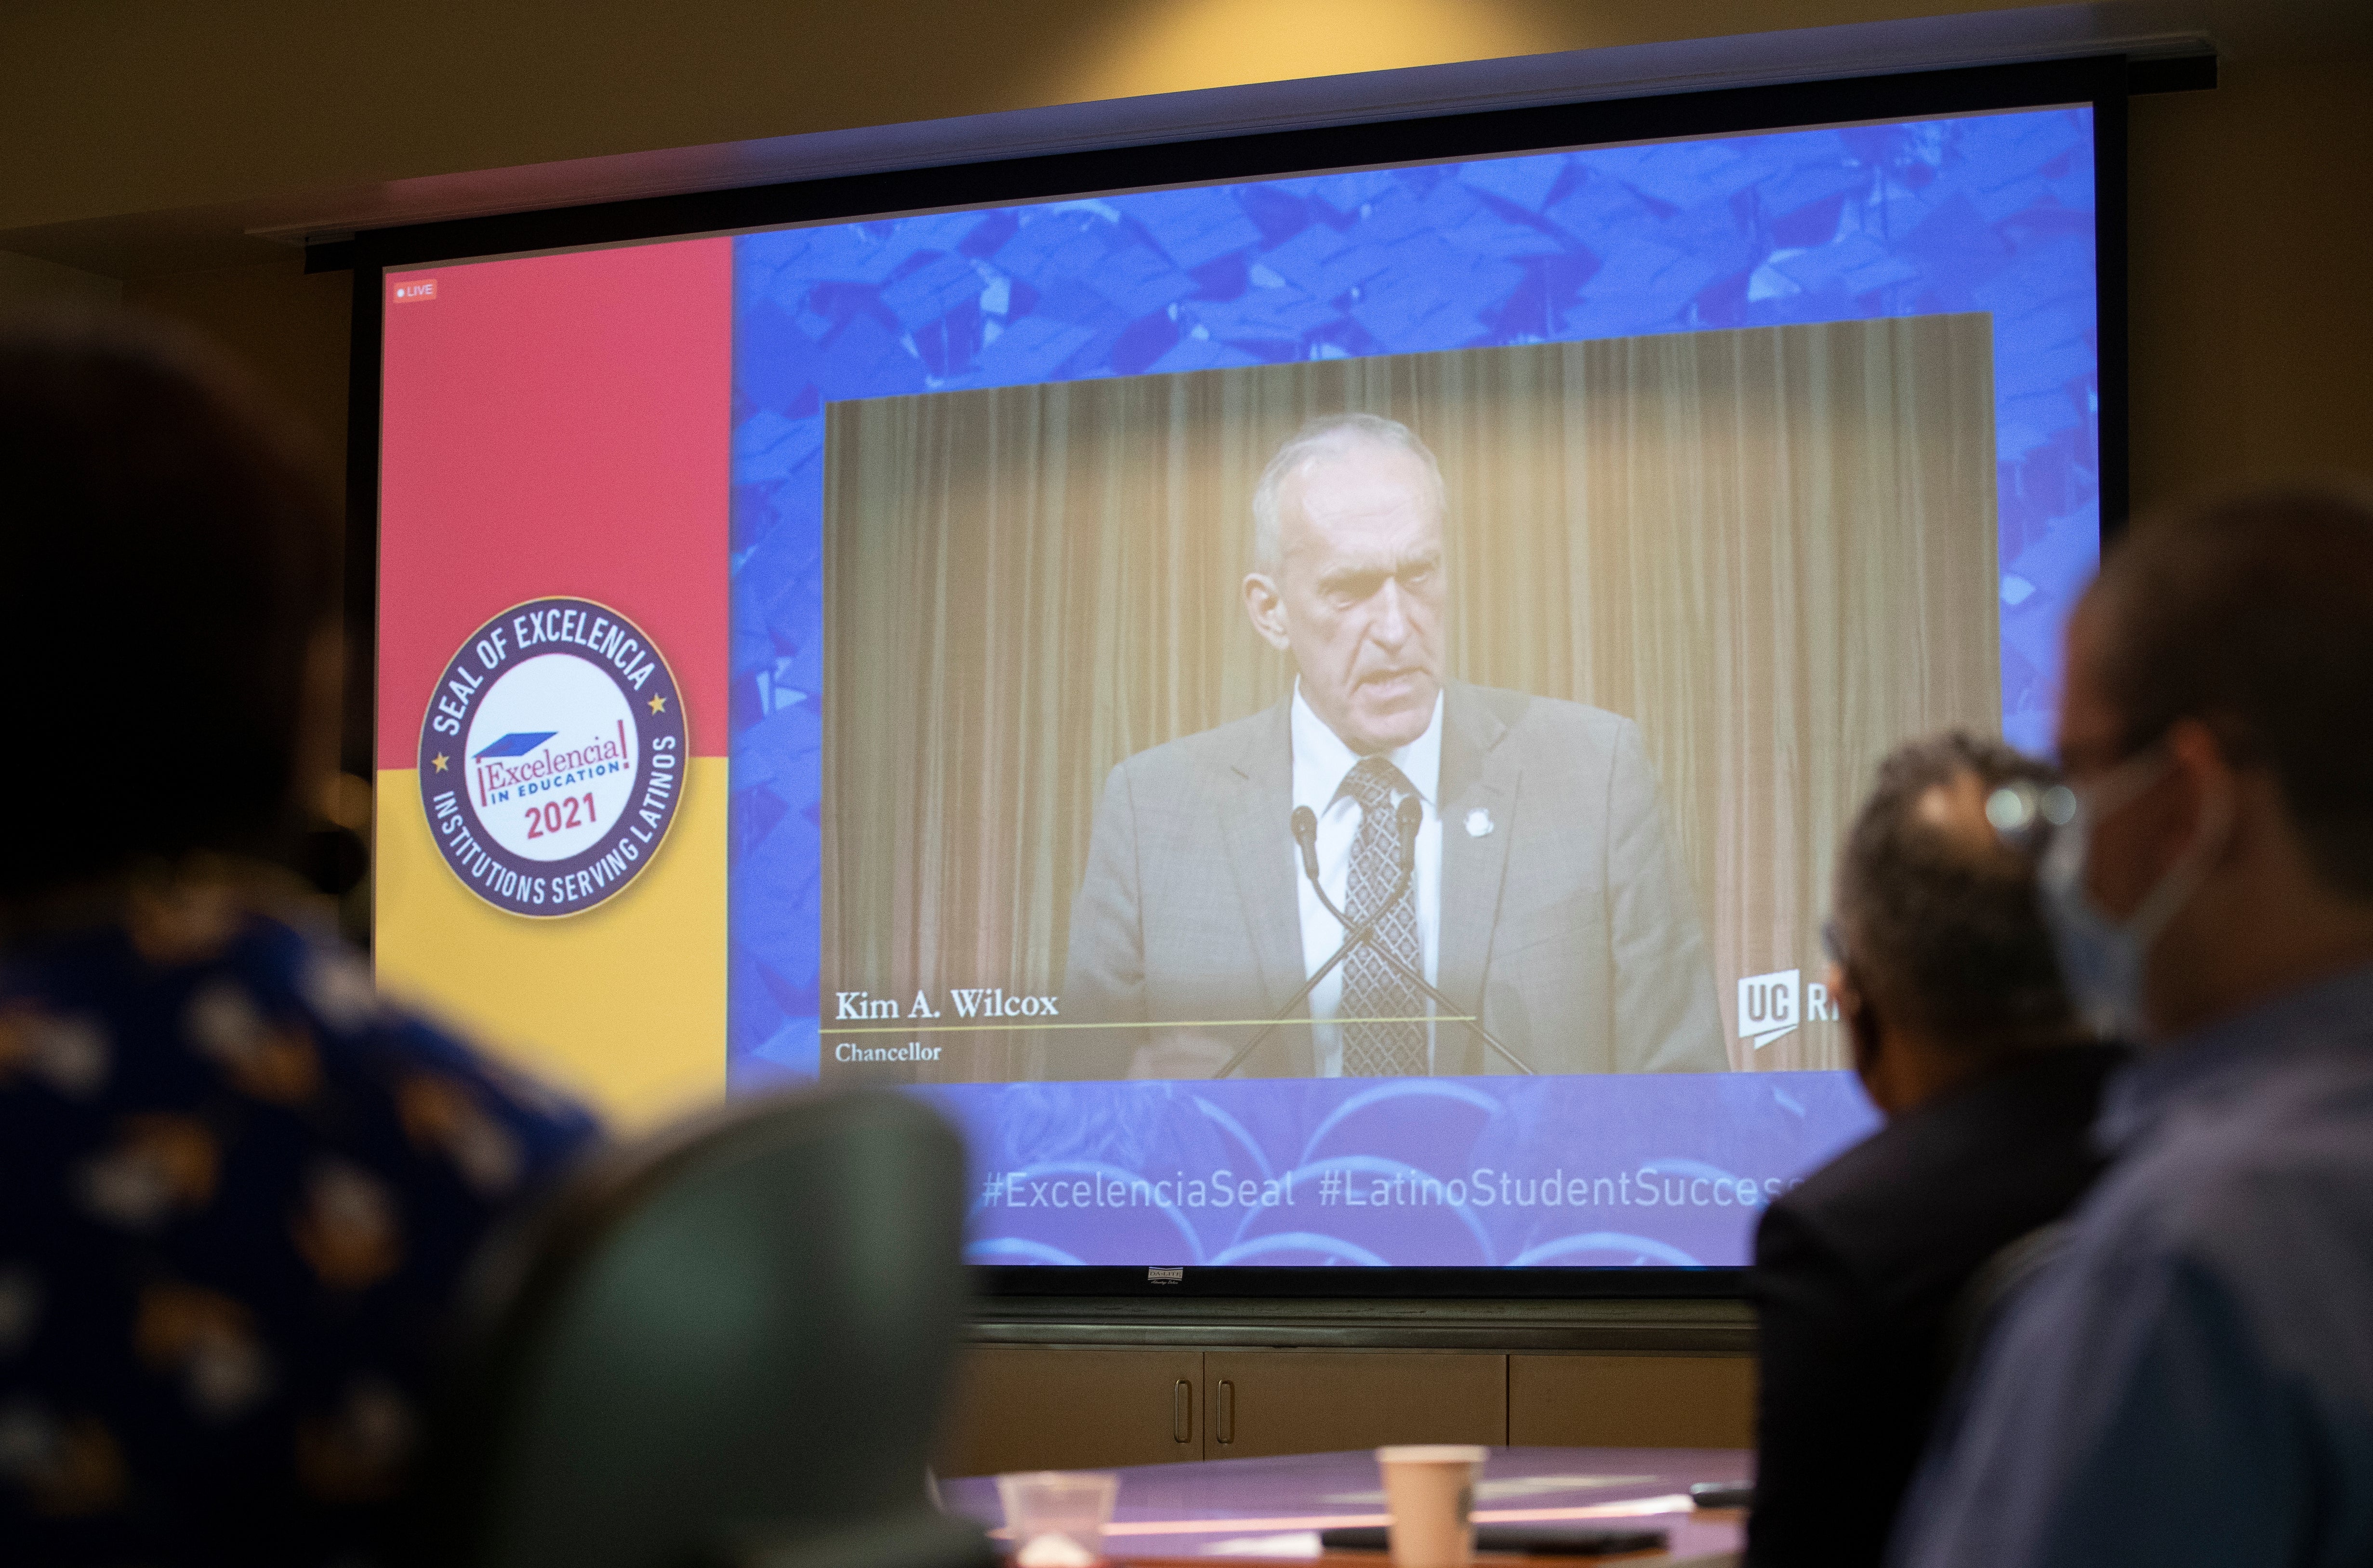 Guest watch as Chancellor Kim Wilcox is streamed live from Washington D.C. as he excepts the Seal of Excelencia award for UCR on Friday, October 29, 2021, at UC Riverside. UCR and several other universities received the Seal of Excelencia in Education certification during an event in Washington, D.C. (UCR/Stan Lim)